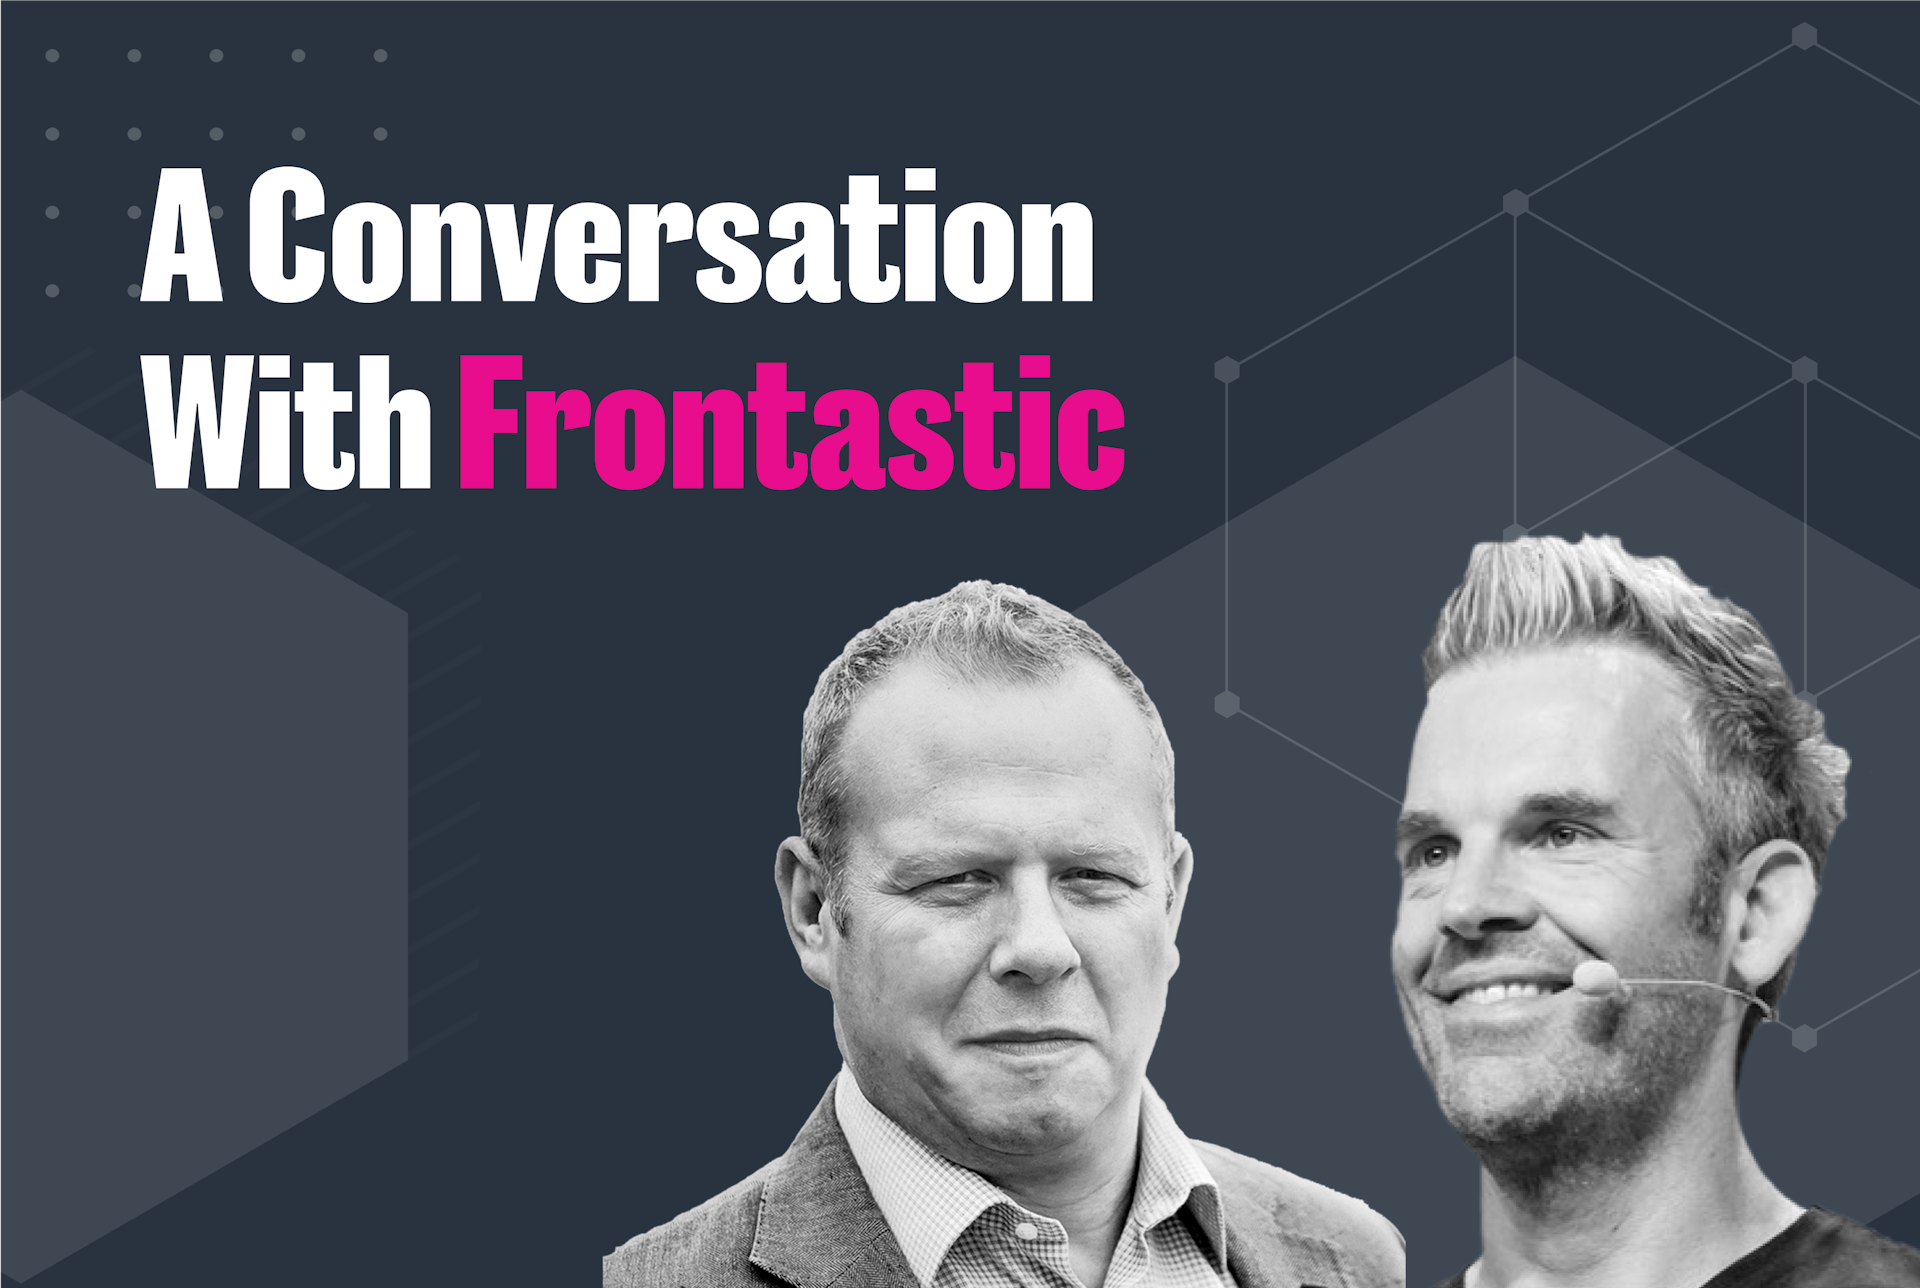 A conversation with Frontastic